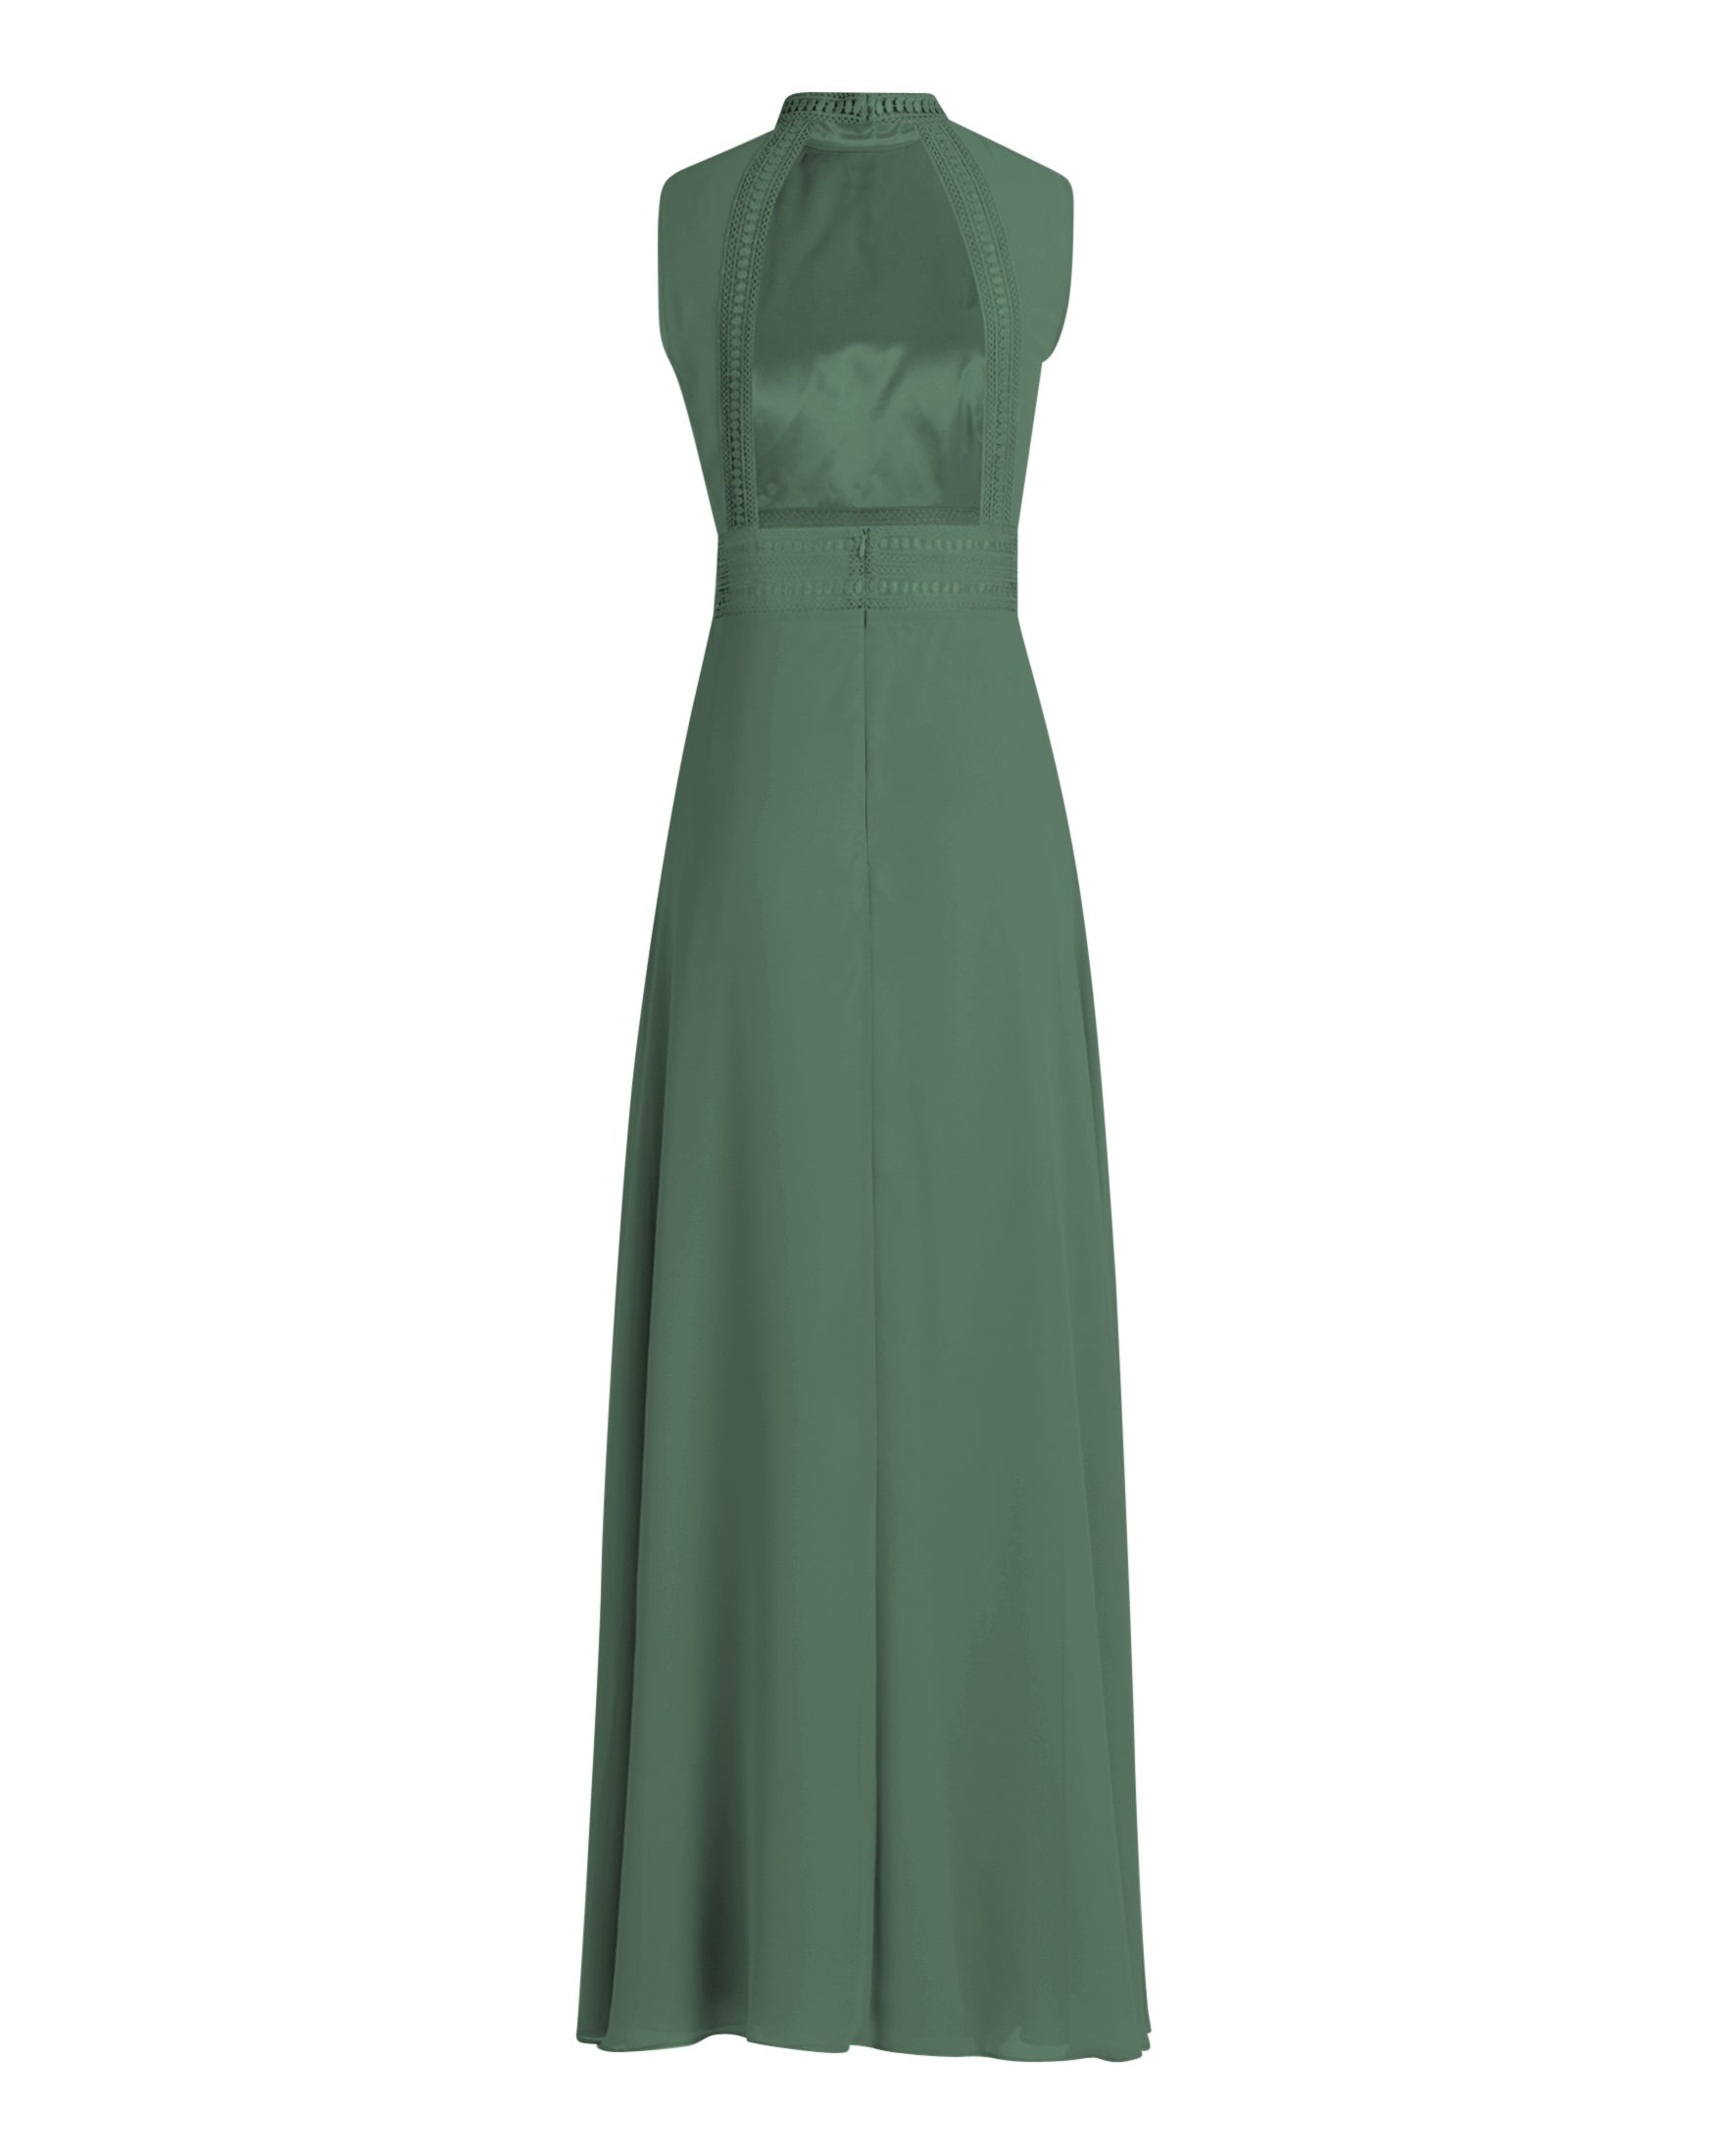 Green Dress Long Without Sleeve